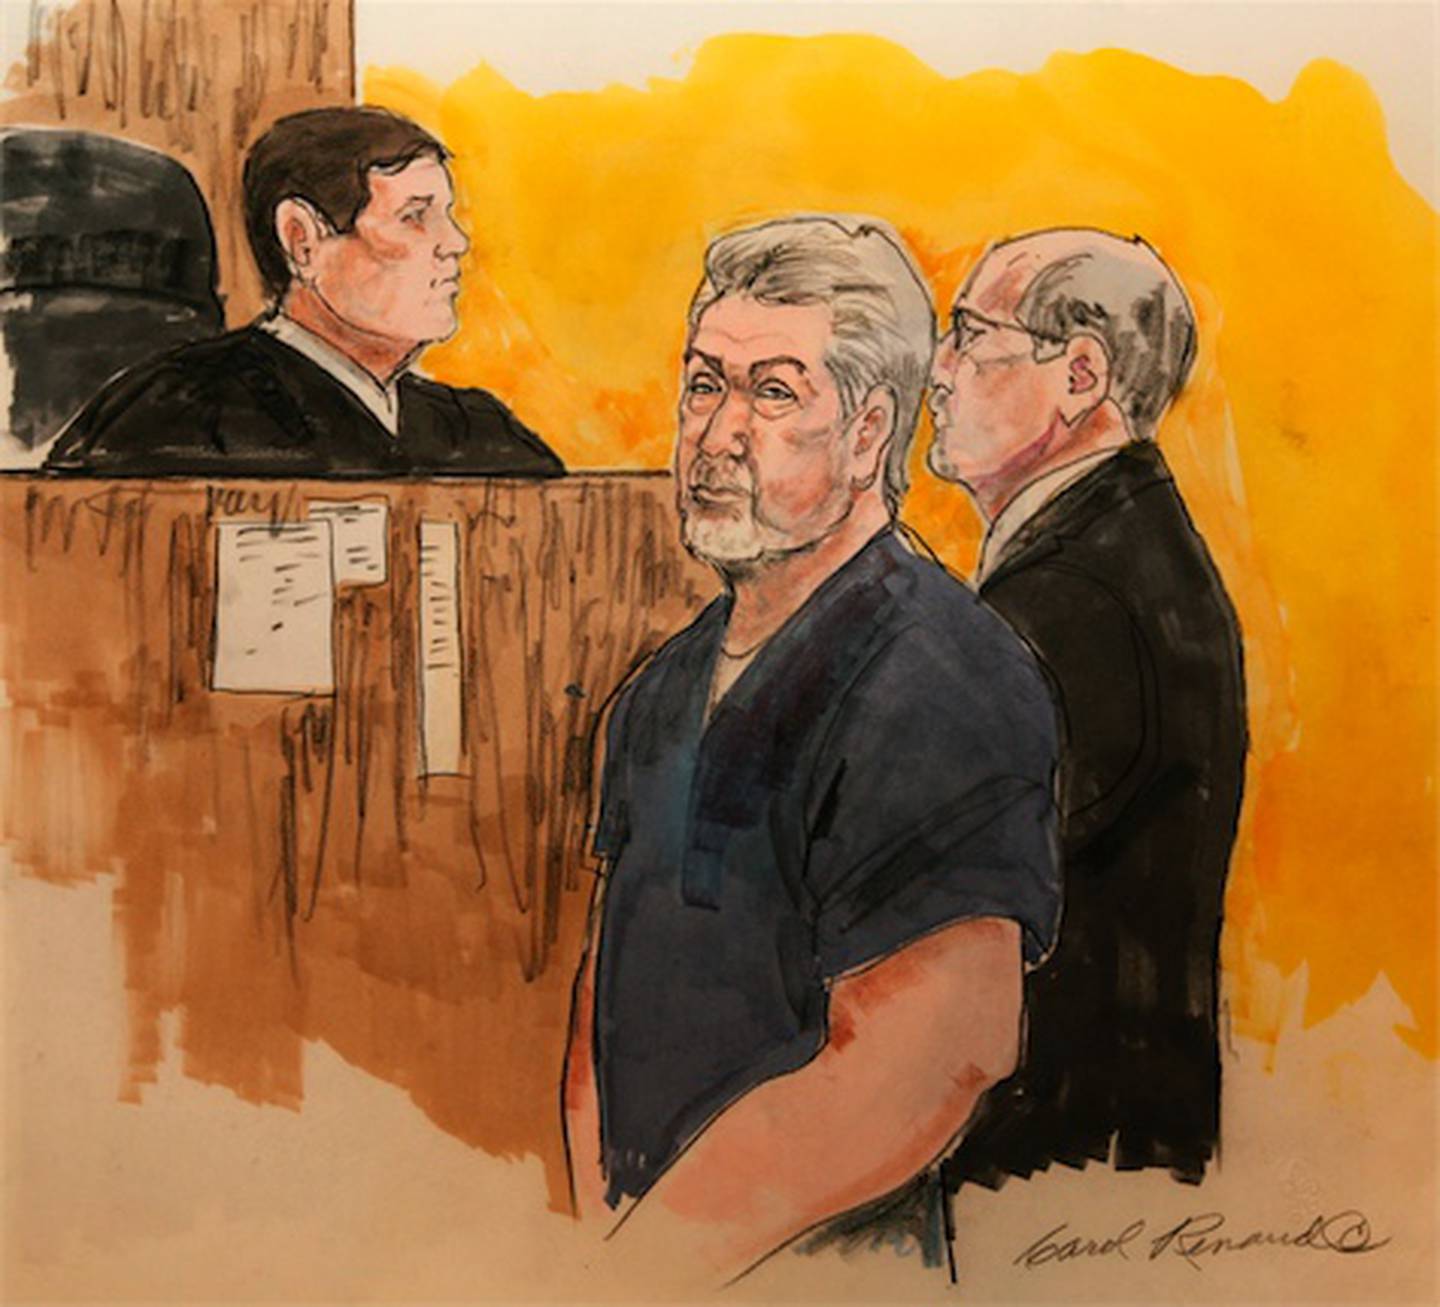 This 2009 sketch of Bolingbrook police officer Drew Peterson by courtroom artist Carol Renaud is seen at her Chicago home on Thursday. Artists have drawn legal proceedings since the Salem witch trials to the recent corruption trial of impeached Gov. Rod Blagojevich, but their ranks are thinning as states lift courtroom camera bans.